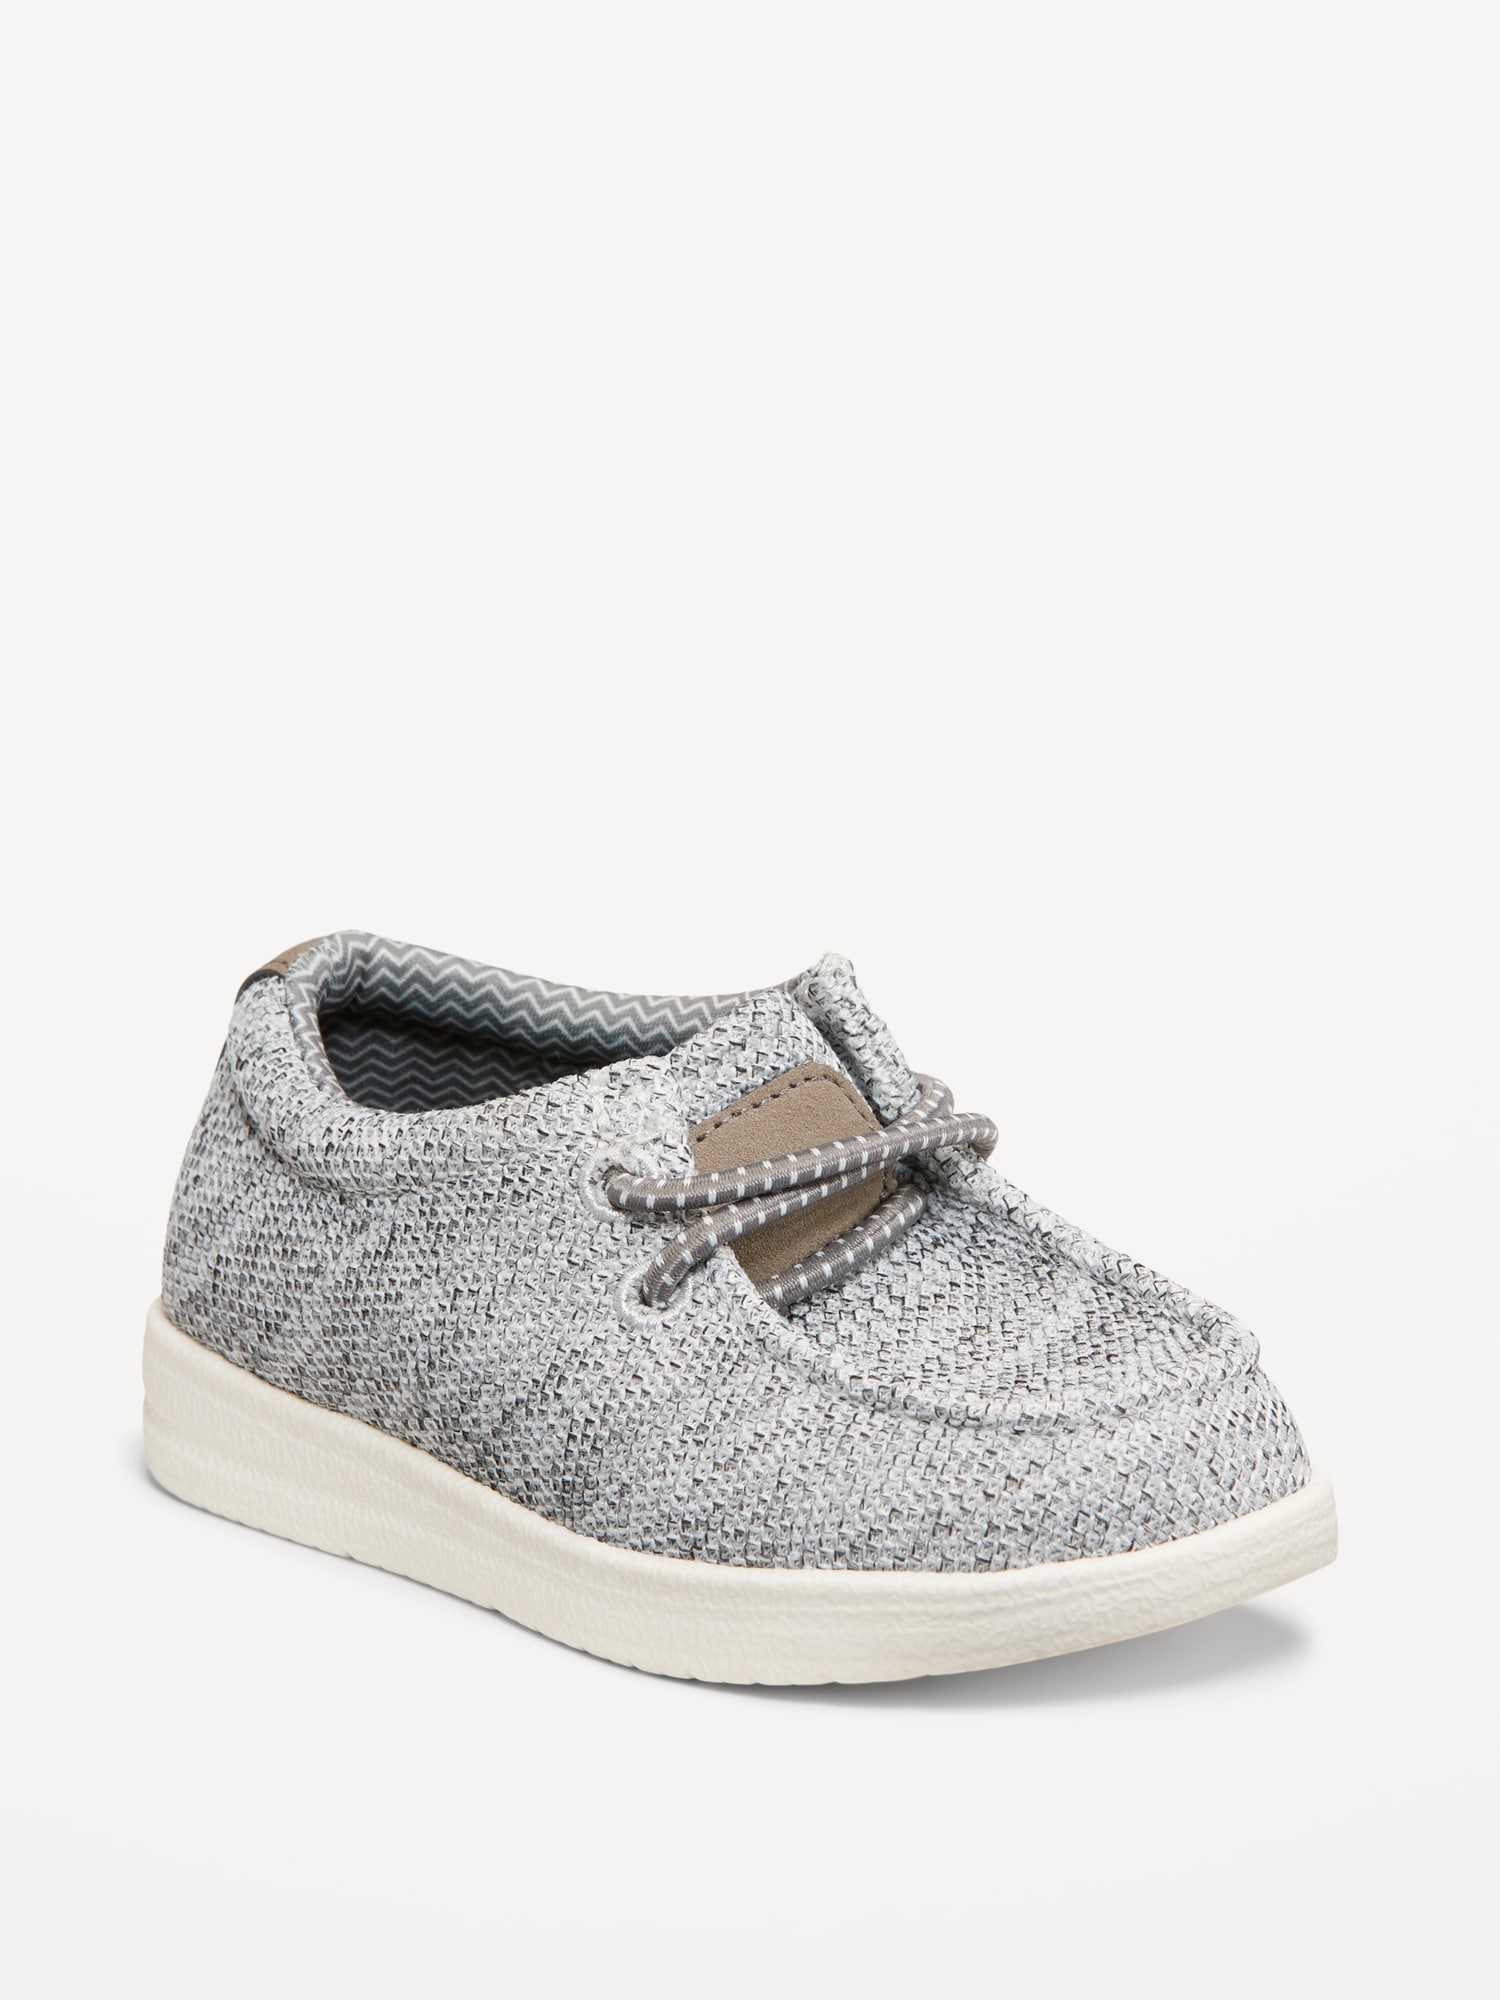 Slip-On Knitted Deck Shoes for Toddler Boys